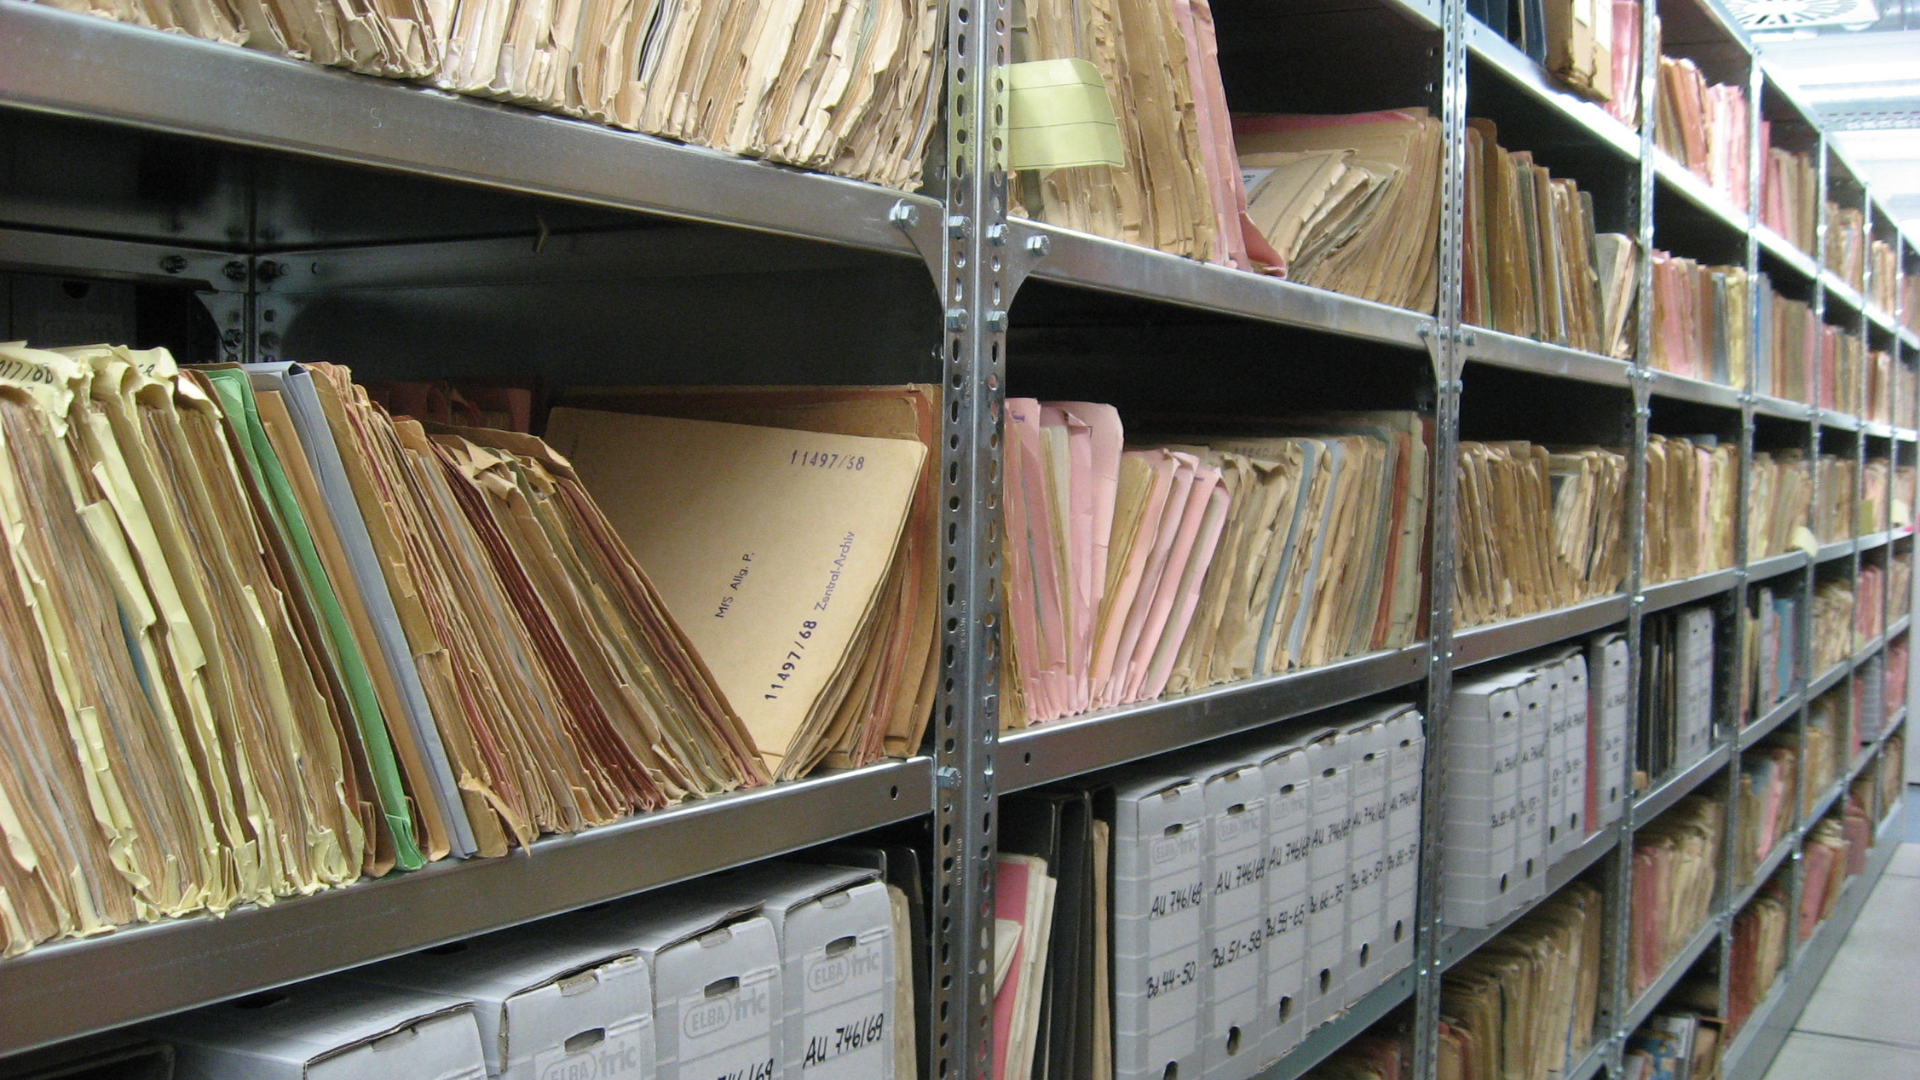 An image of an overcrowded file room in need of digitization and scanning.